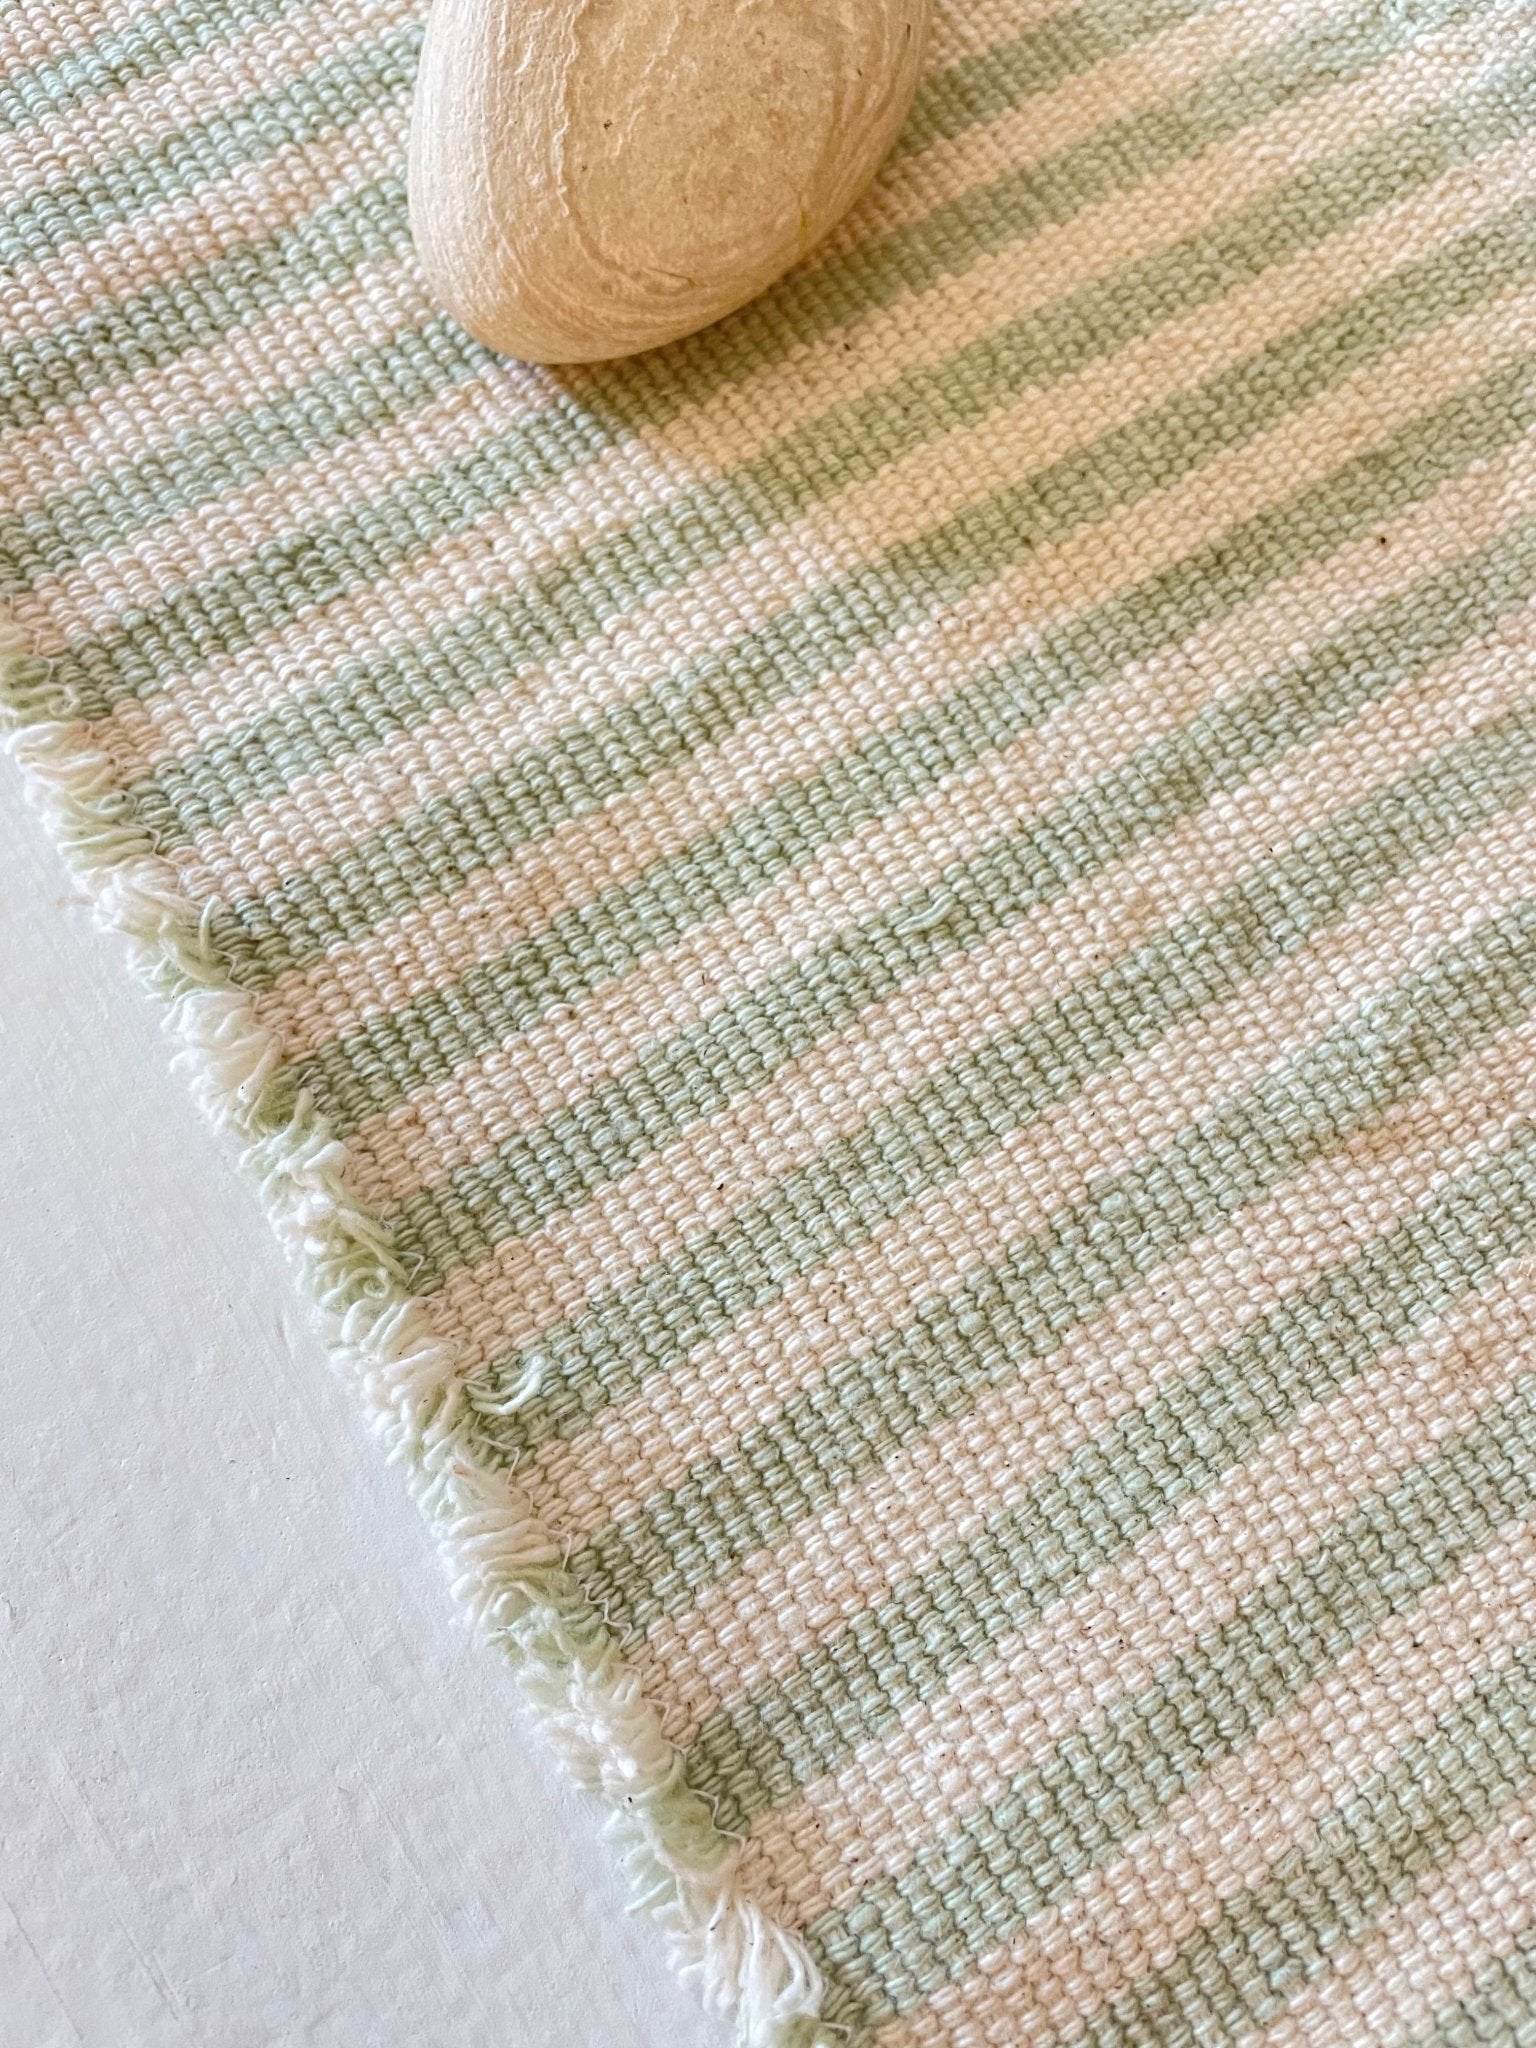 Summer placemats - Green celadon stripes - Behind the Hill